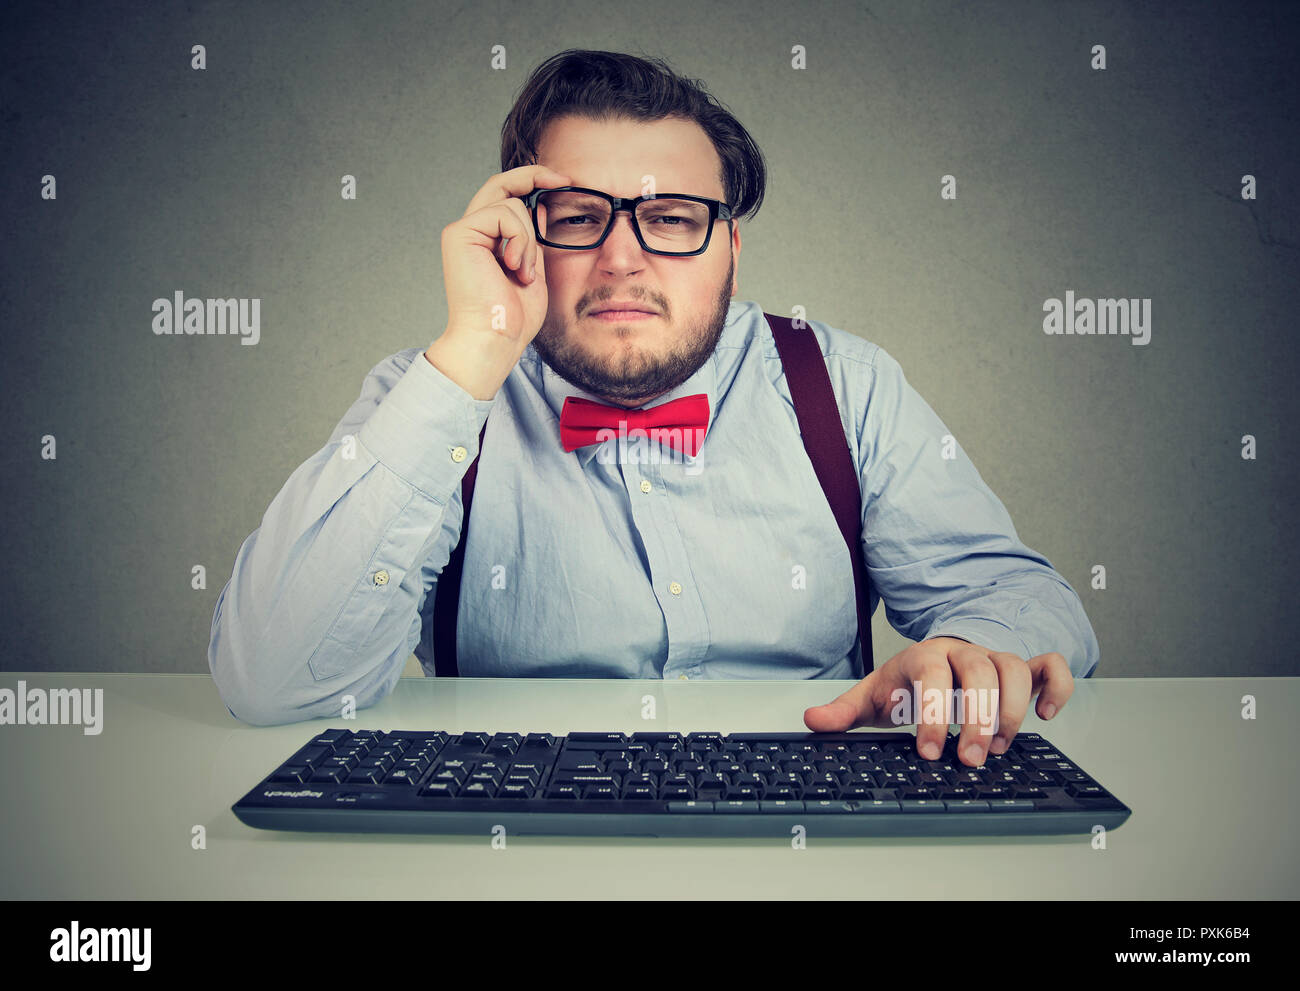 Adult chunky man using keyboard and squinting eyes having vision problems on gray background Stock Photo